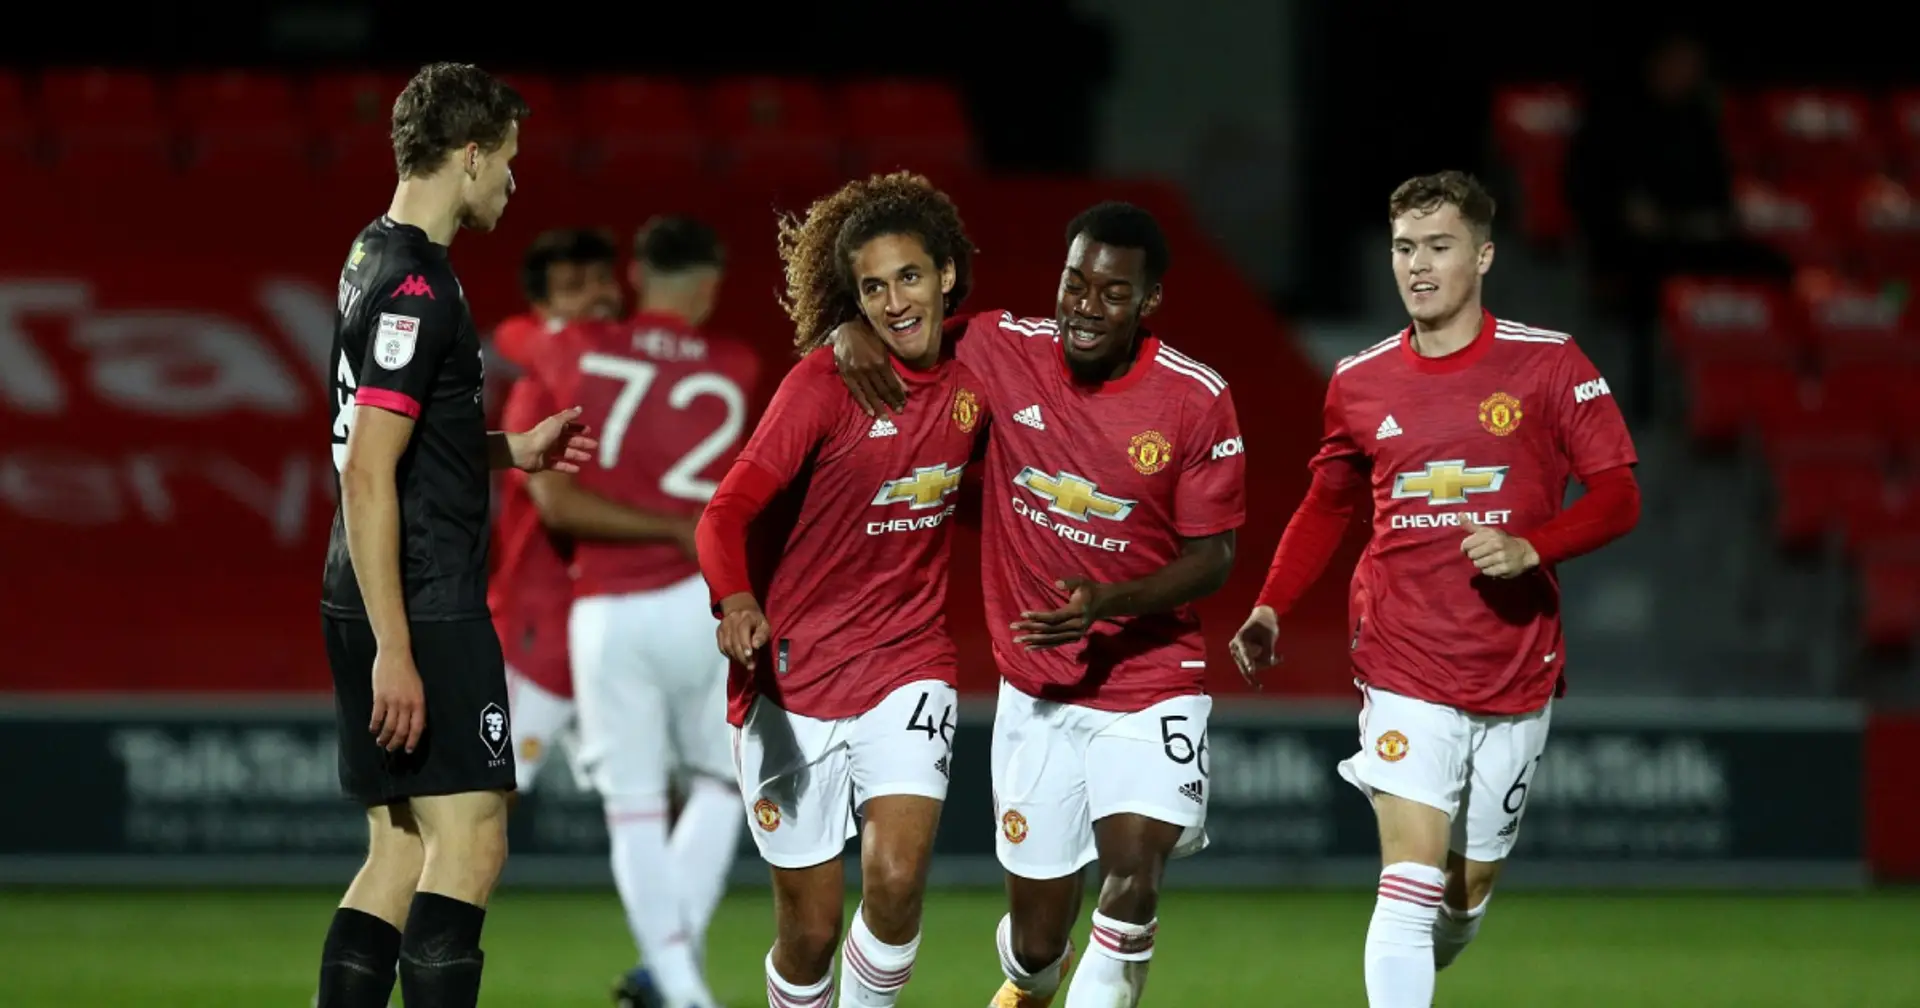 Hannibal sets the stage as United U21s demolish Salford City 6-0: Read match report from our user-admin Matt Koller